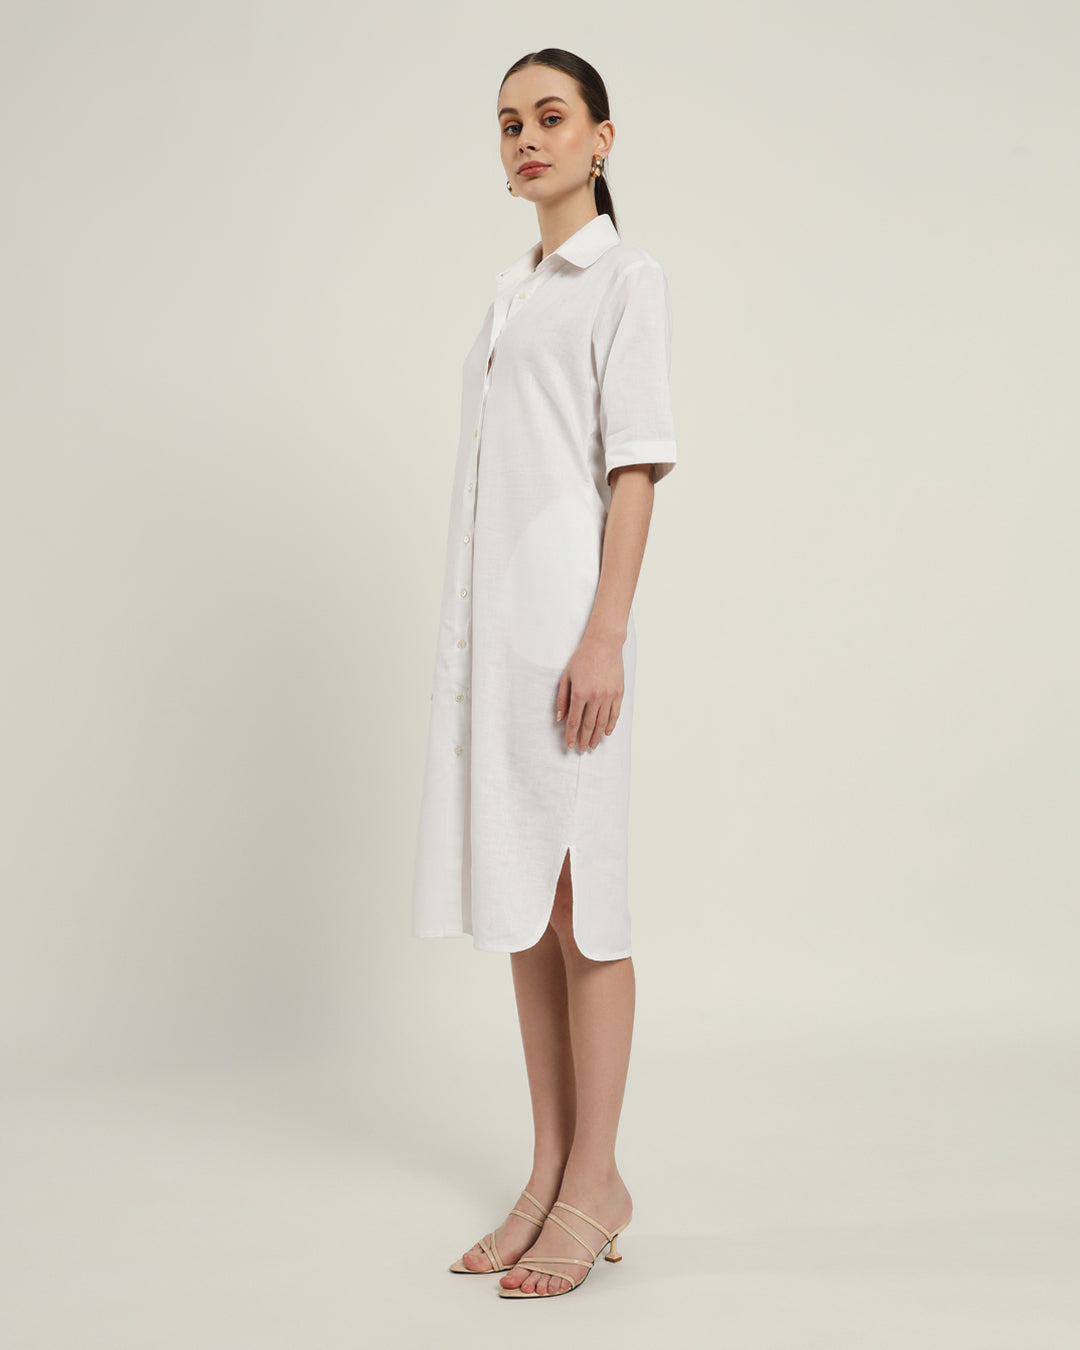 The Tampa Daisy White Linen Dress